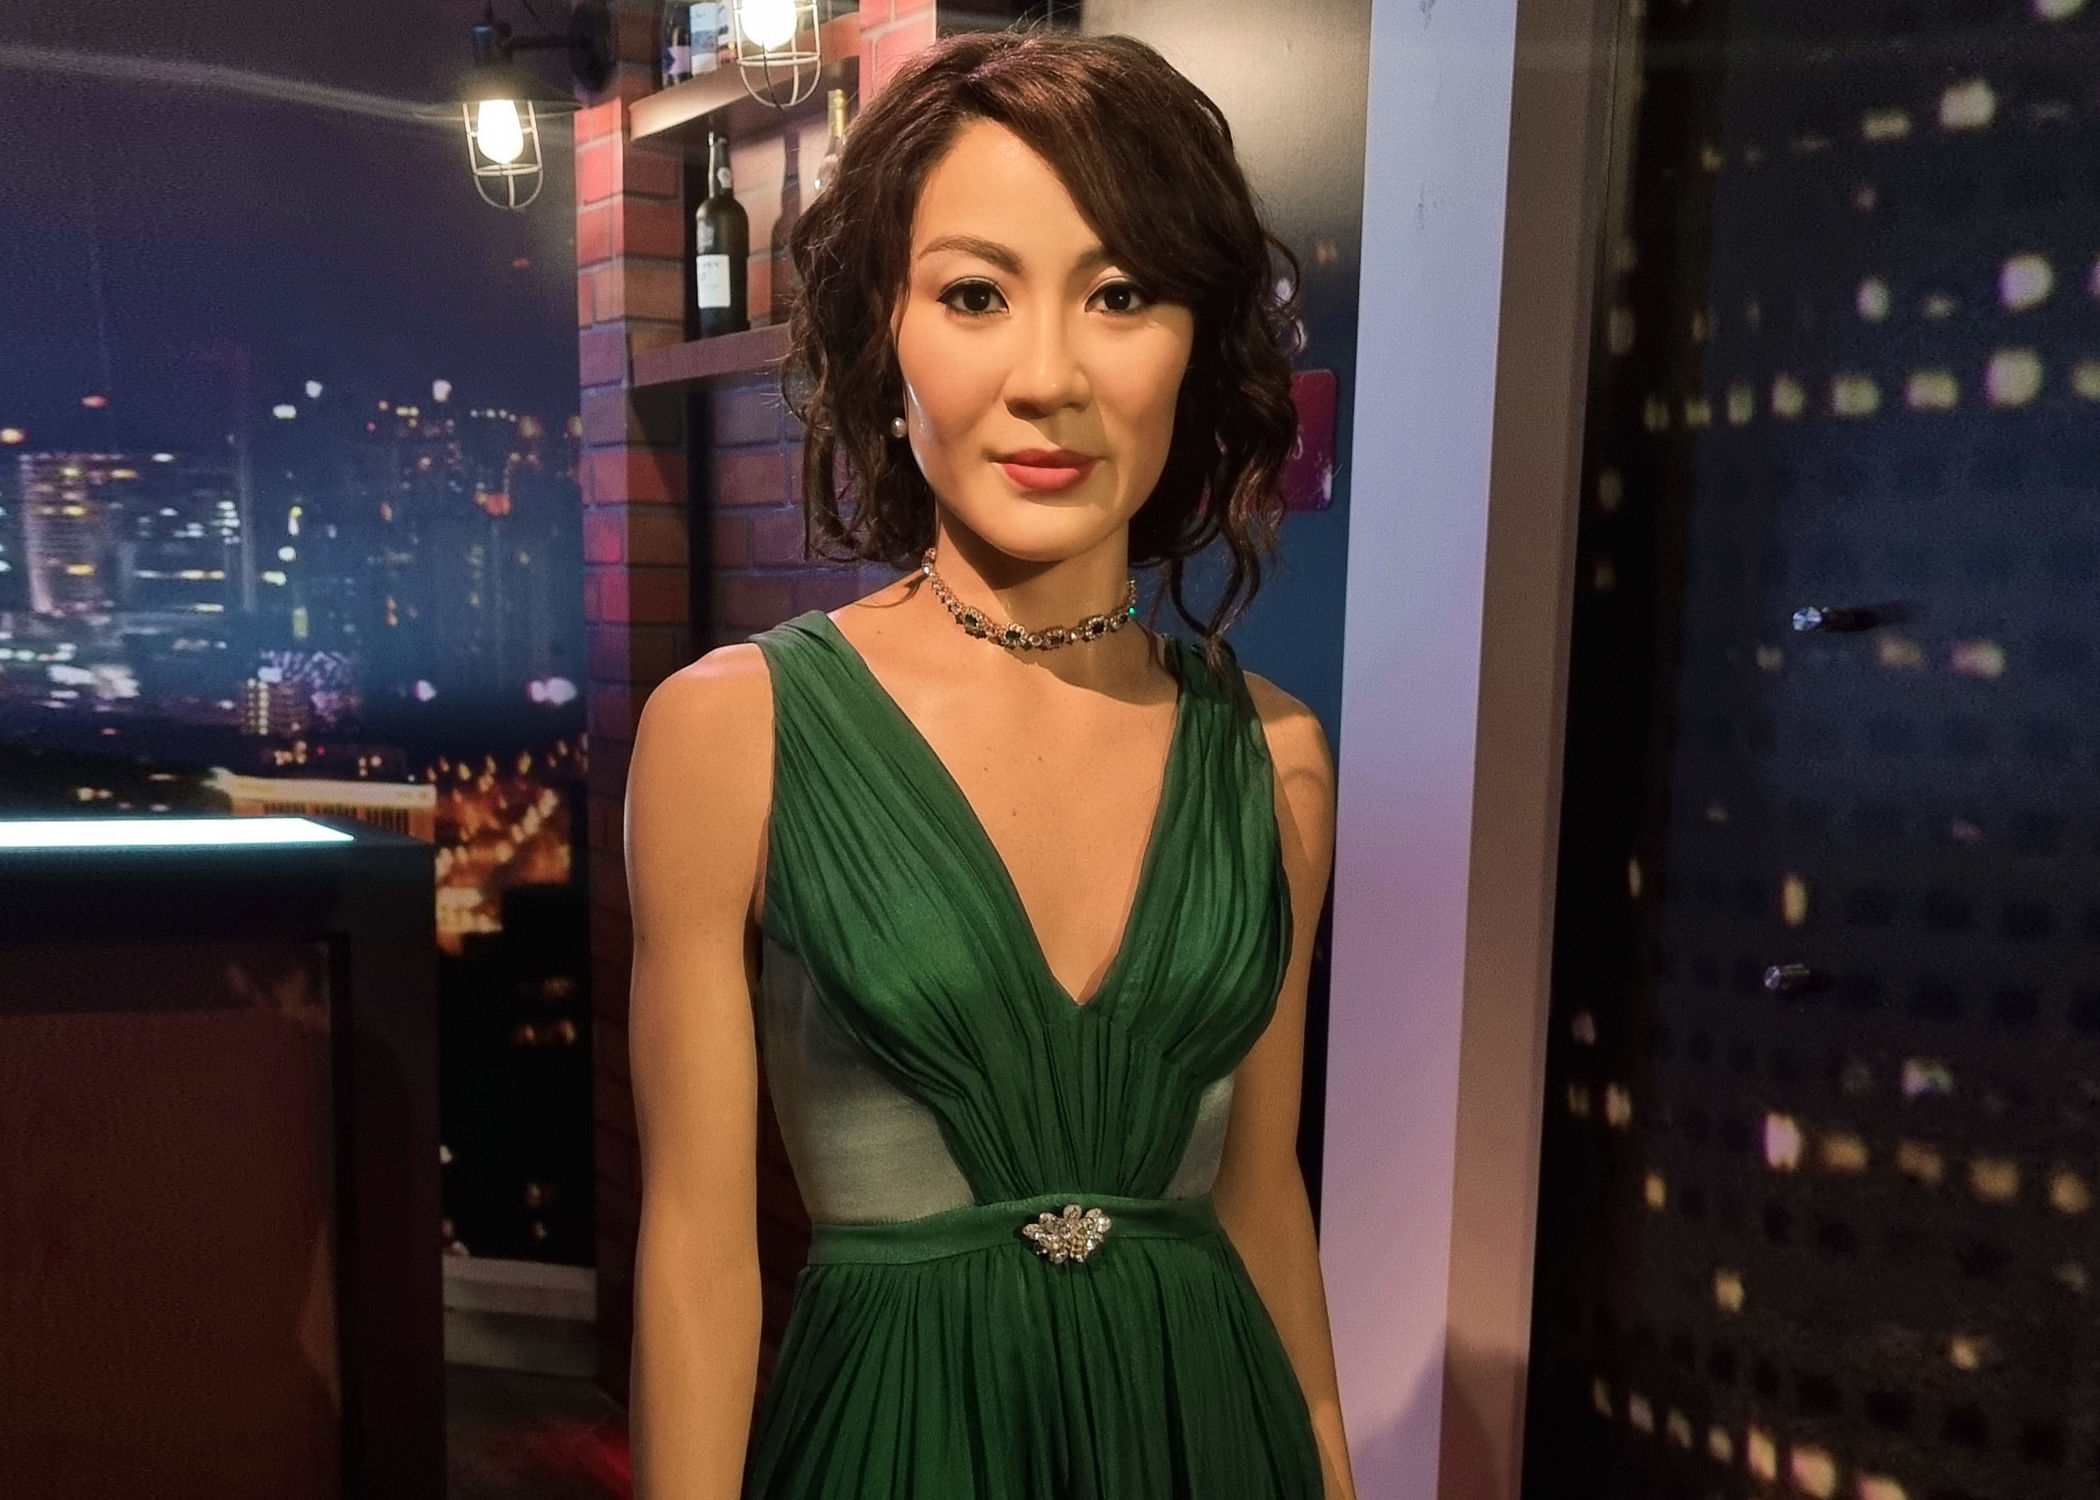 Michelle Yeoh in Madame Tussauds Singapore